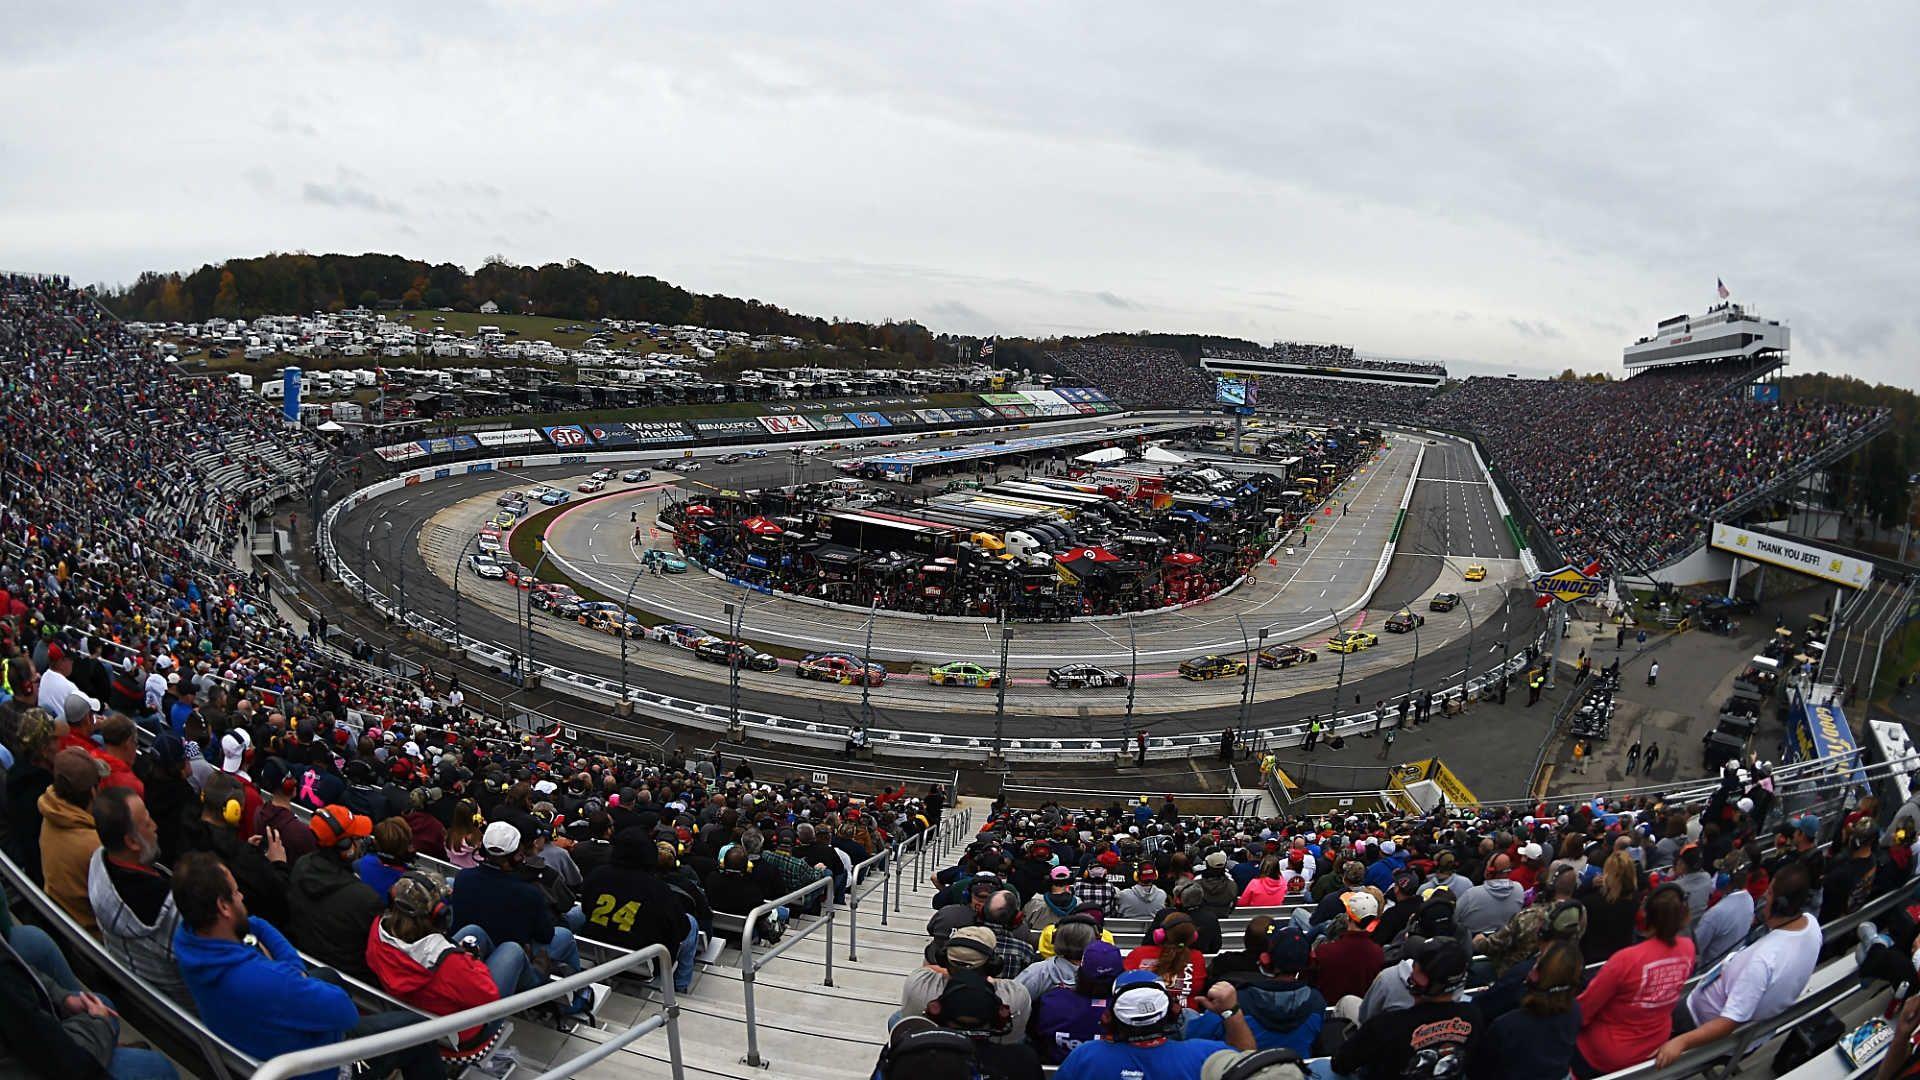 NASCAR at Martinsville: Ten things to know about the STP 500